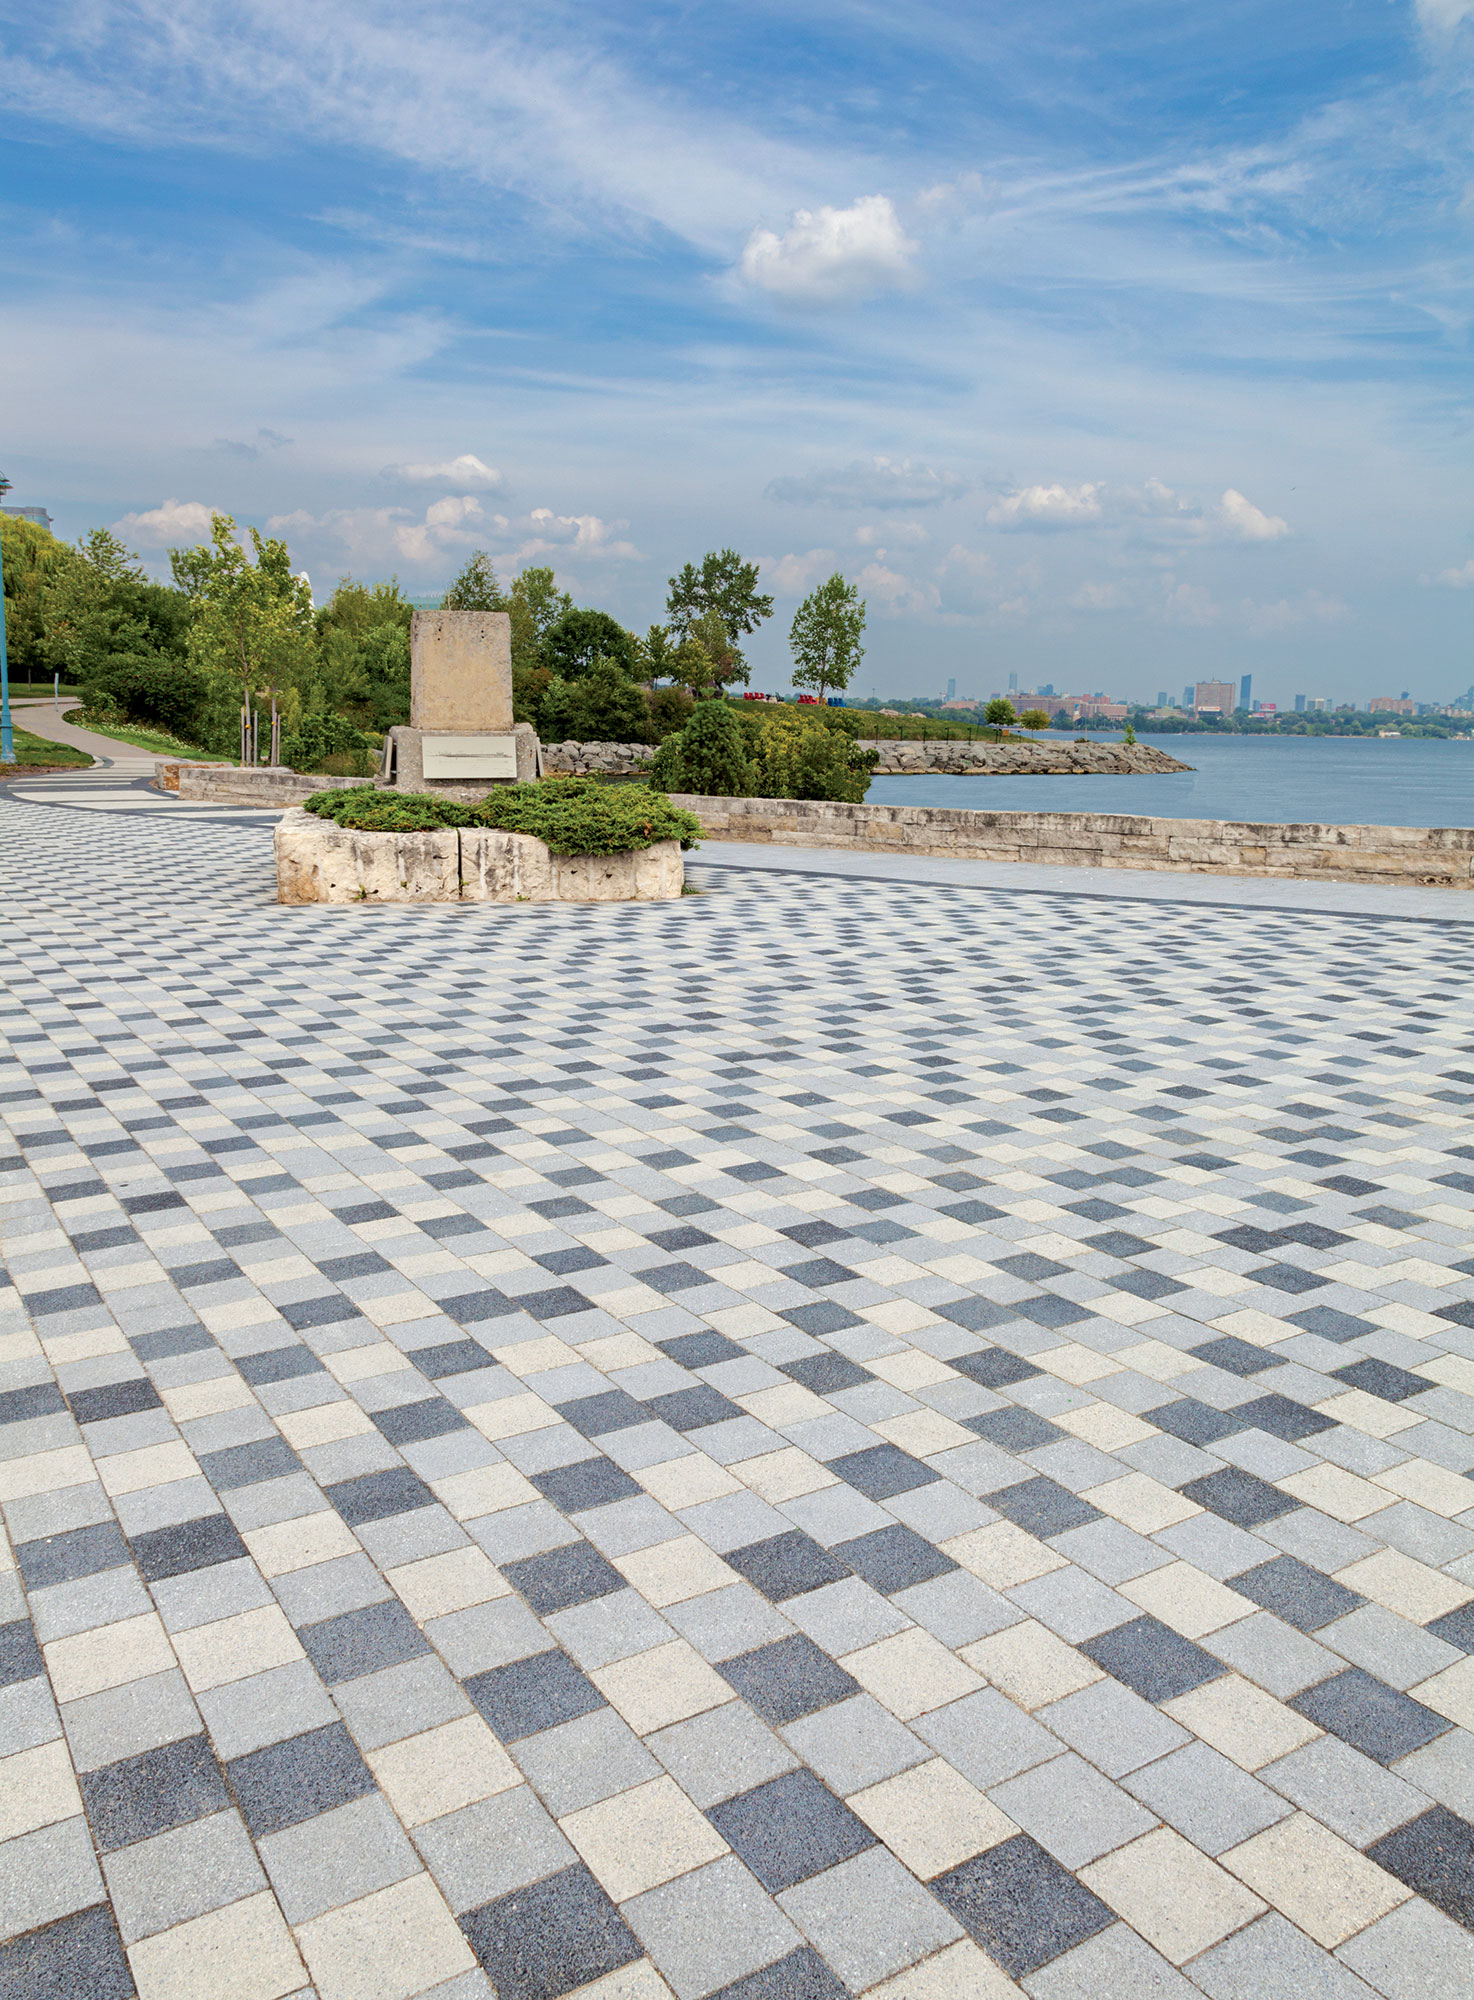 Tri-colored Series pavers create a stunning checkerboard pattern near the shoreline, as a distinct garden island and sculpture sits nearby.